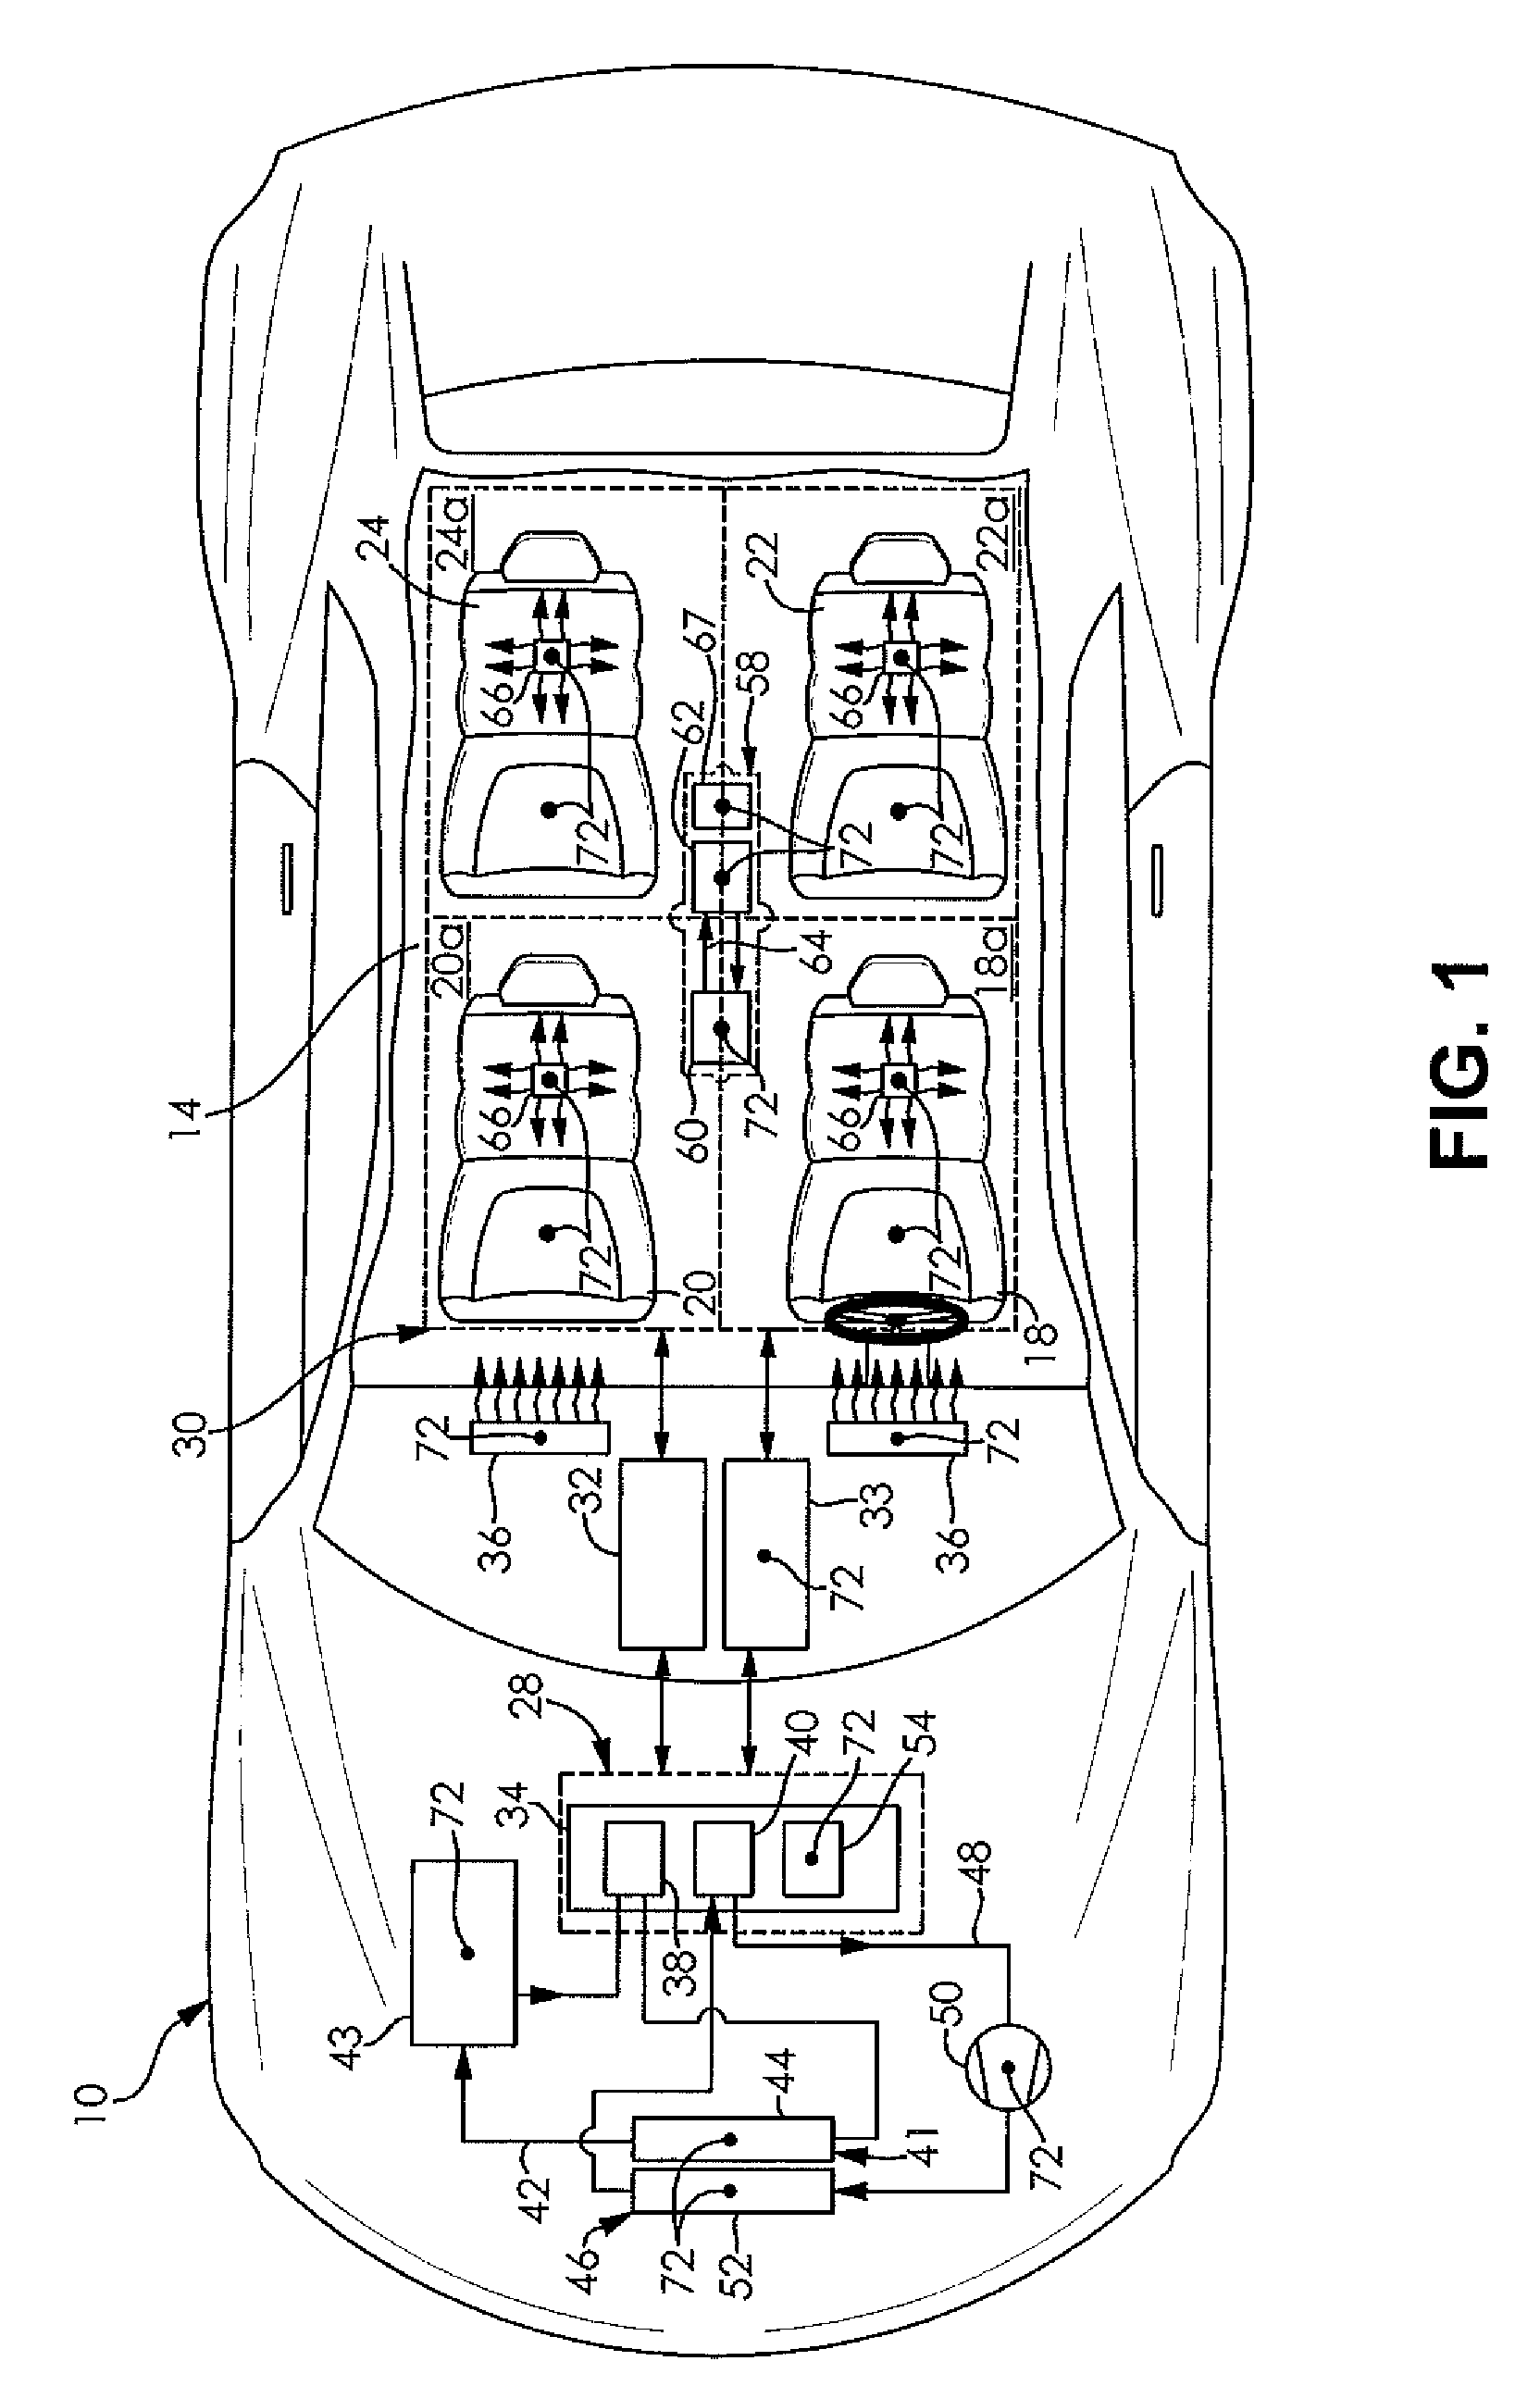 Control strategy for a zonal heating, ventilating, and air conditioning system of a vehicle